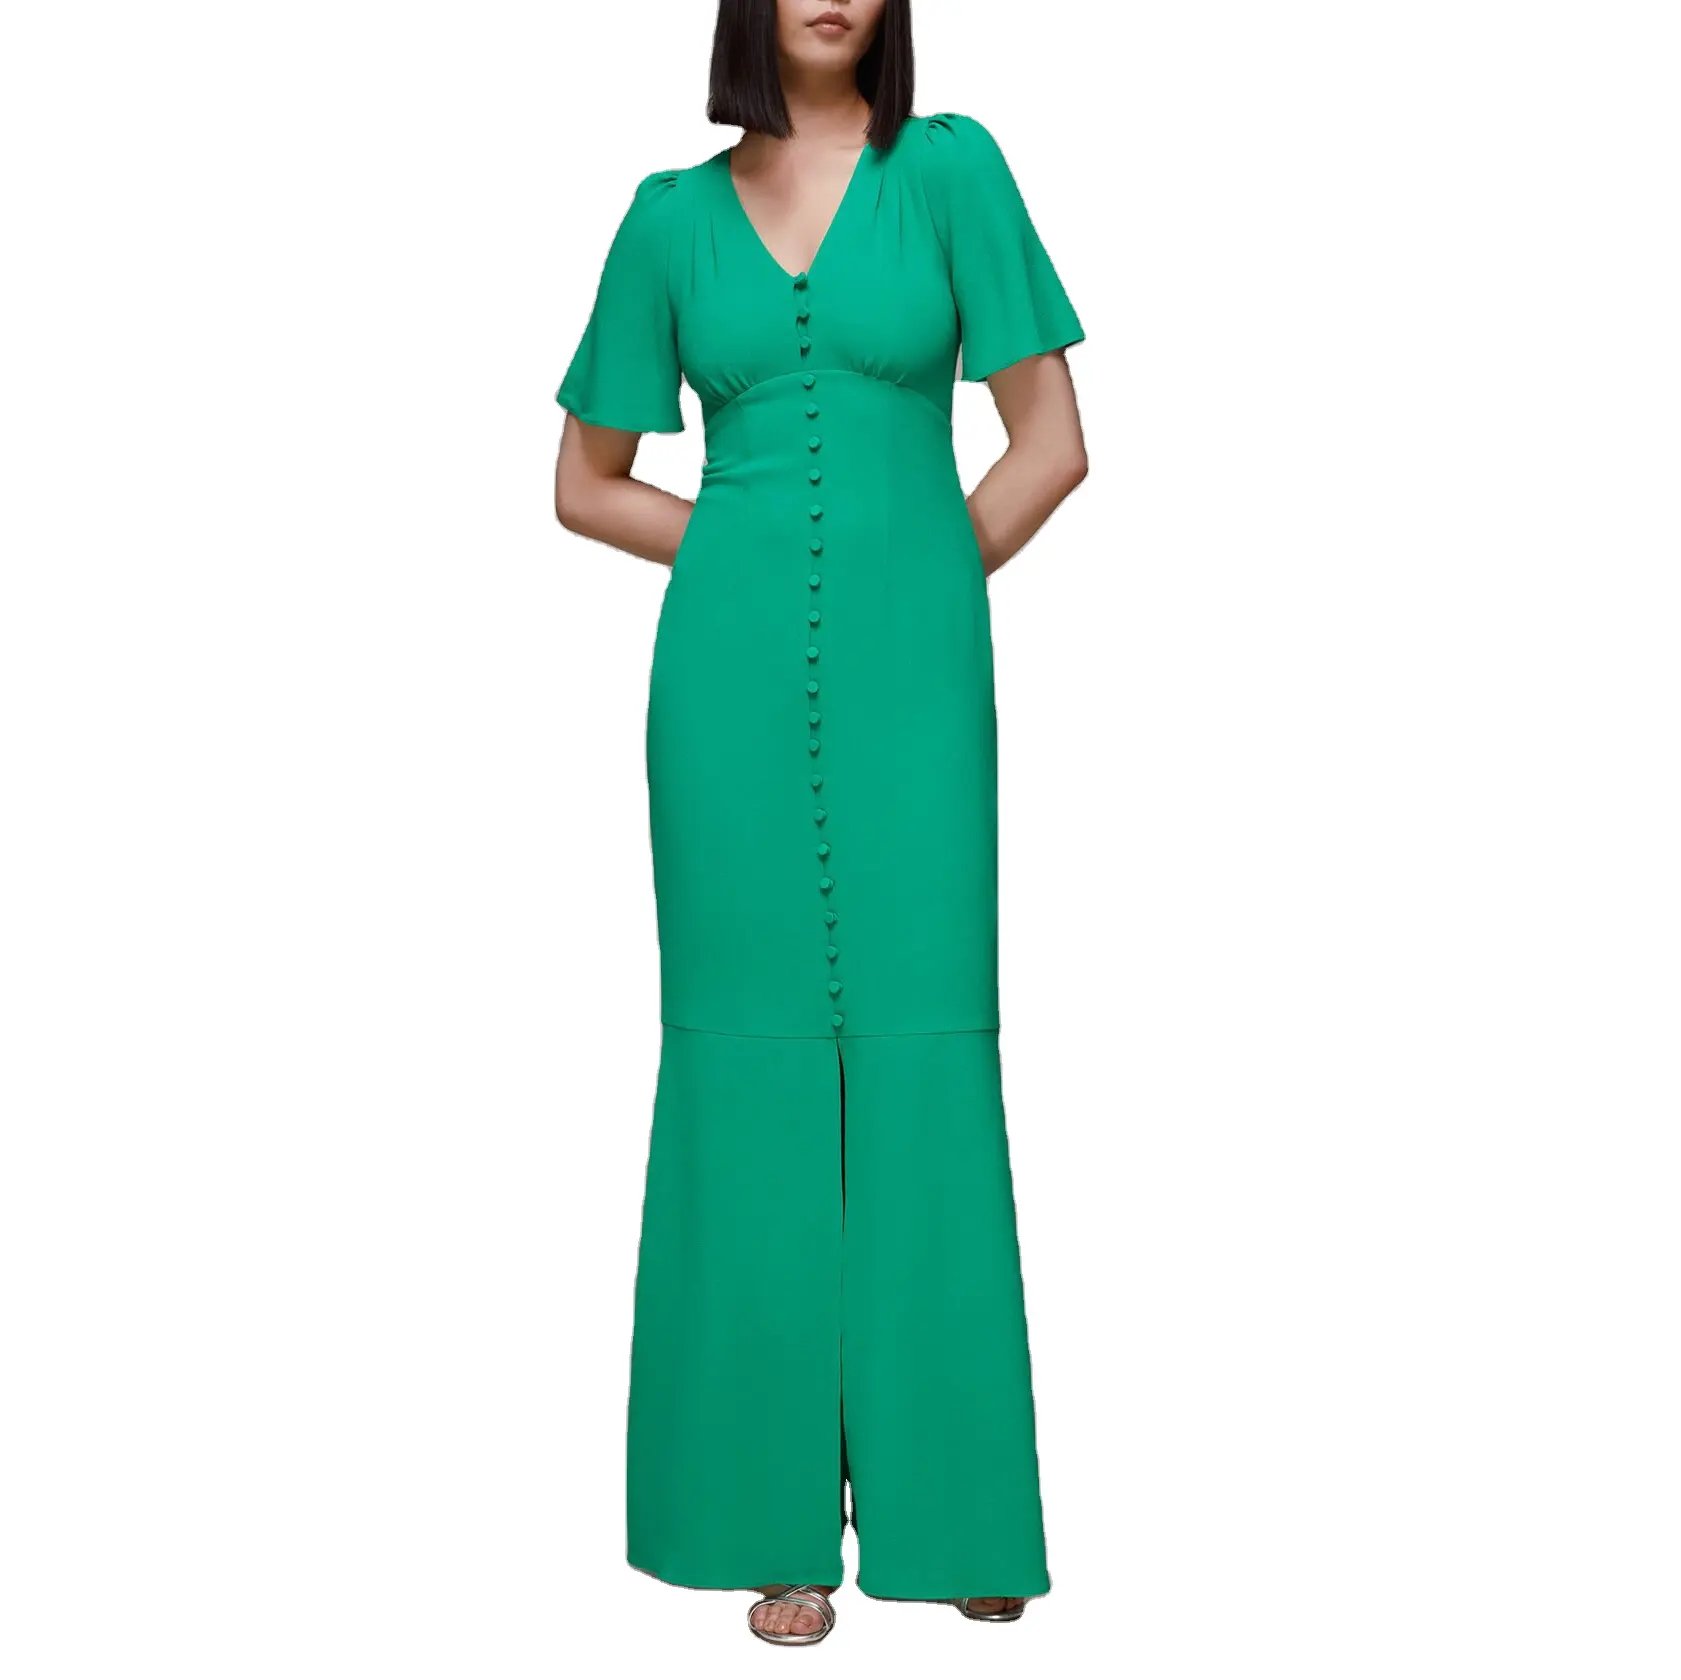 High Class Chic Women Evening Long Maxi Dress Button Slit Front Empire Sexy Floaty Sleeves Fitted Elegant Dress With Fishtail He